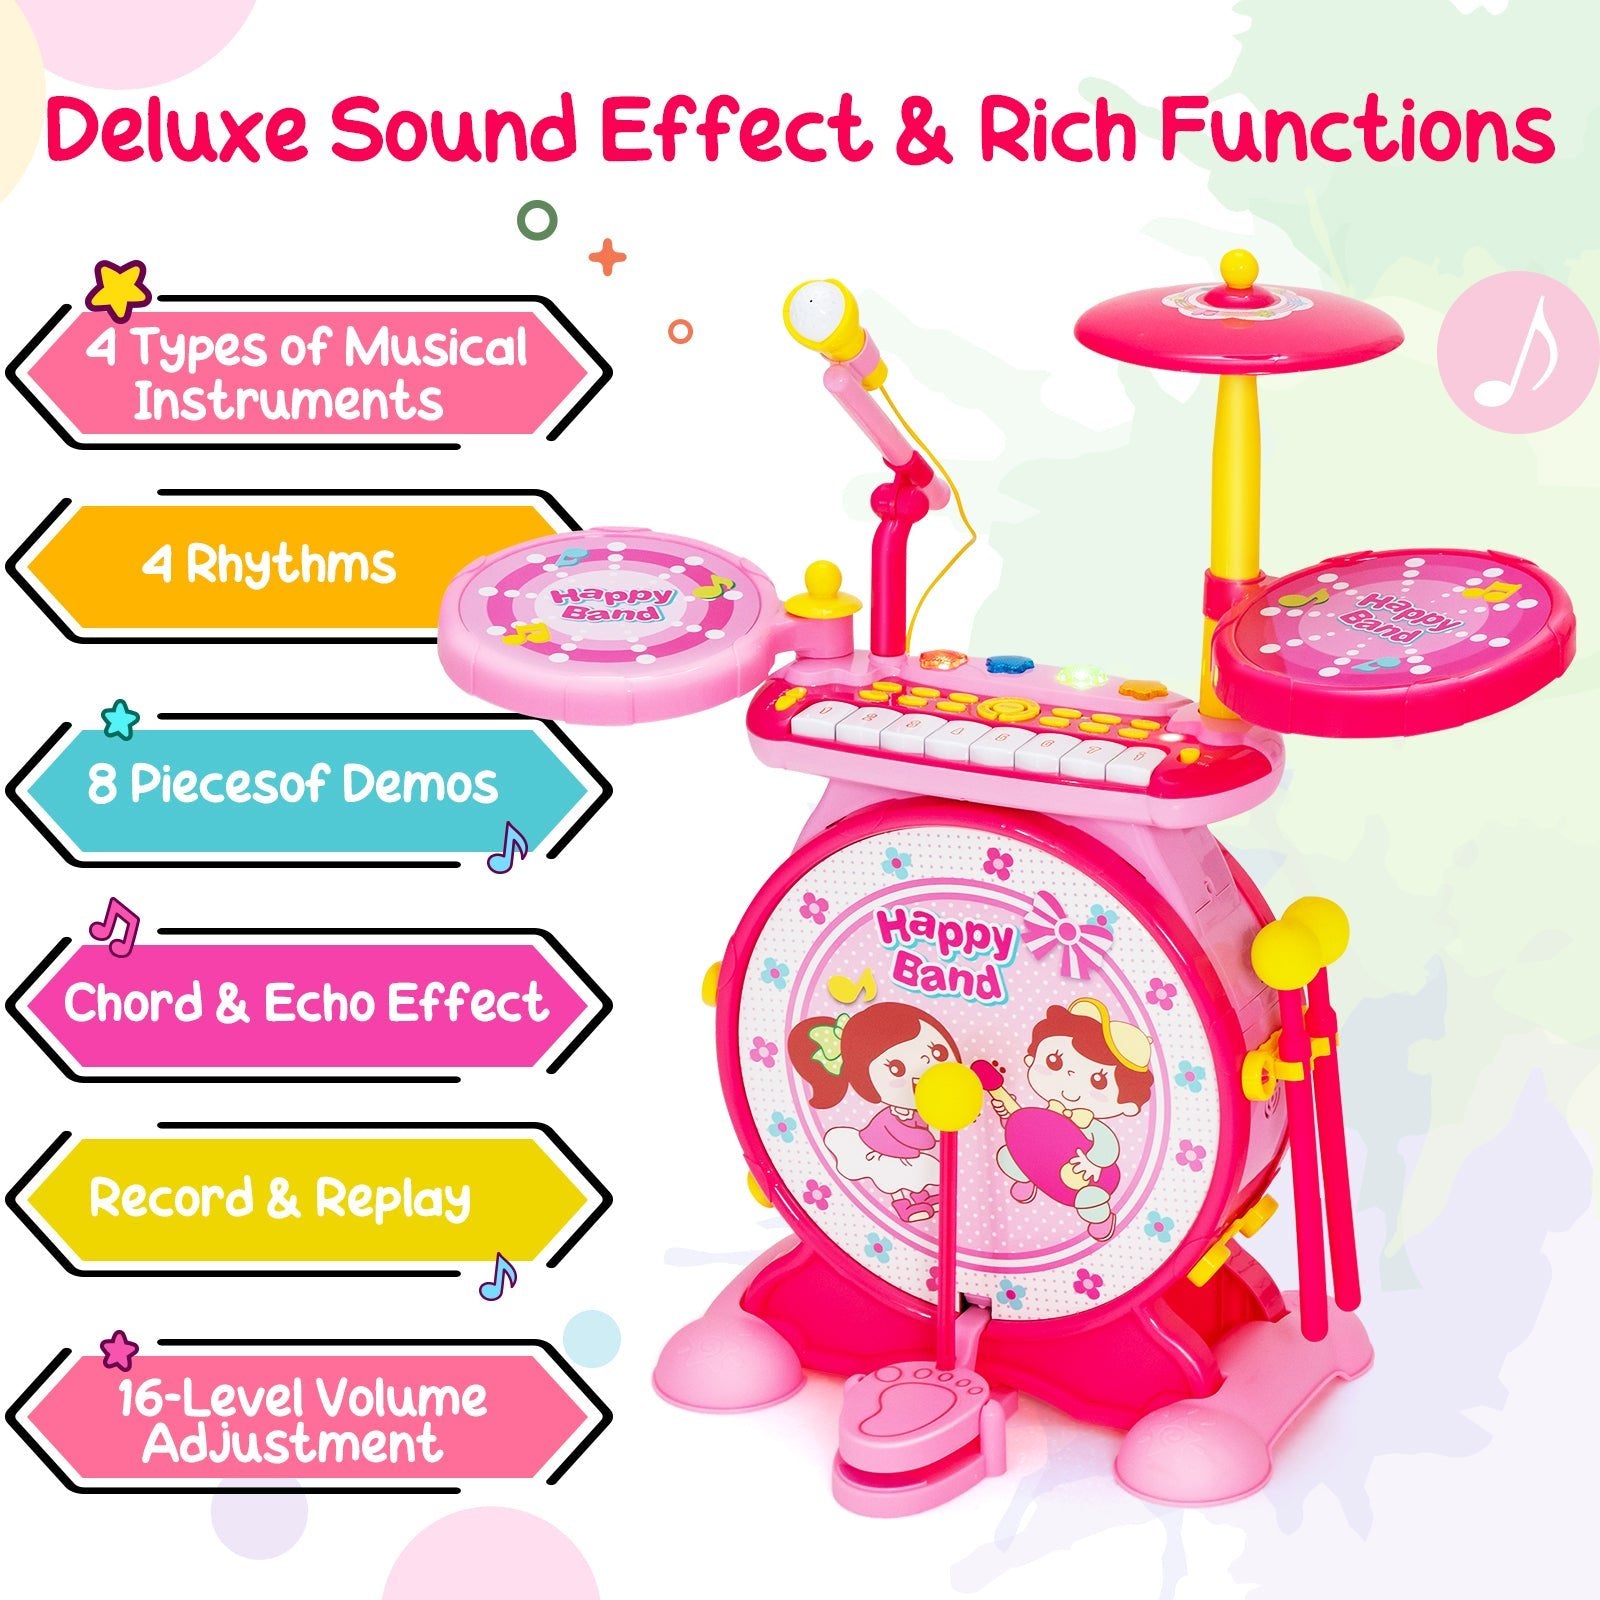 Kids Playful Pink Drum Kit - 2-in-1 Electronic Toy with Keyboard & Microphone